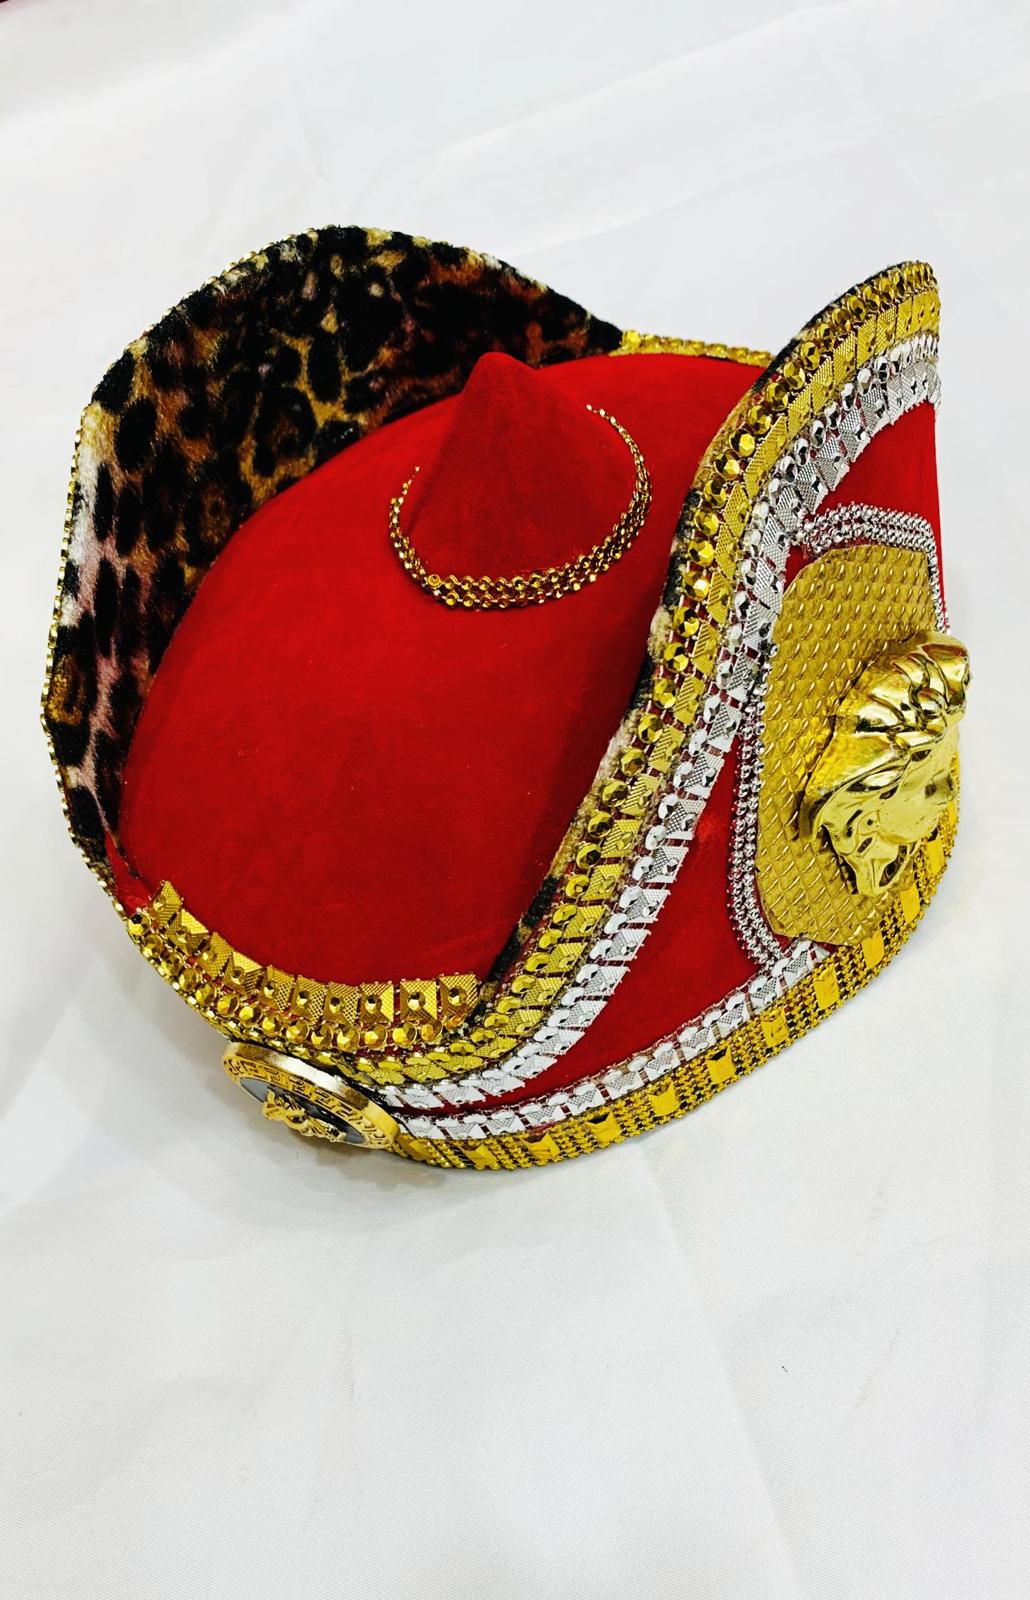 Engraved gold Igbo Cap, African Royal Hat, Odogwu Cap, Ichie Hat, Kings Cap, prefect for Kingly figure, groom, costume wears. SHIP NEXT DAY